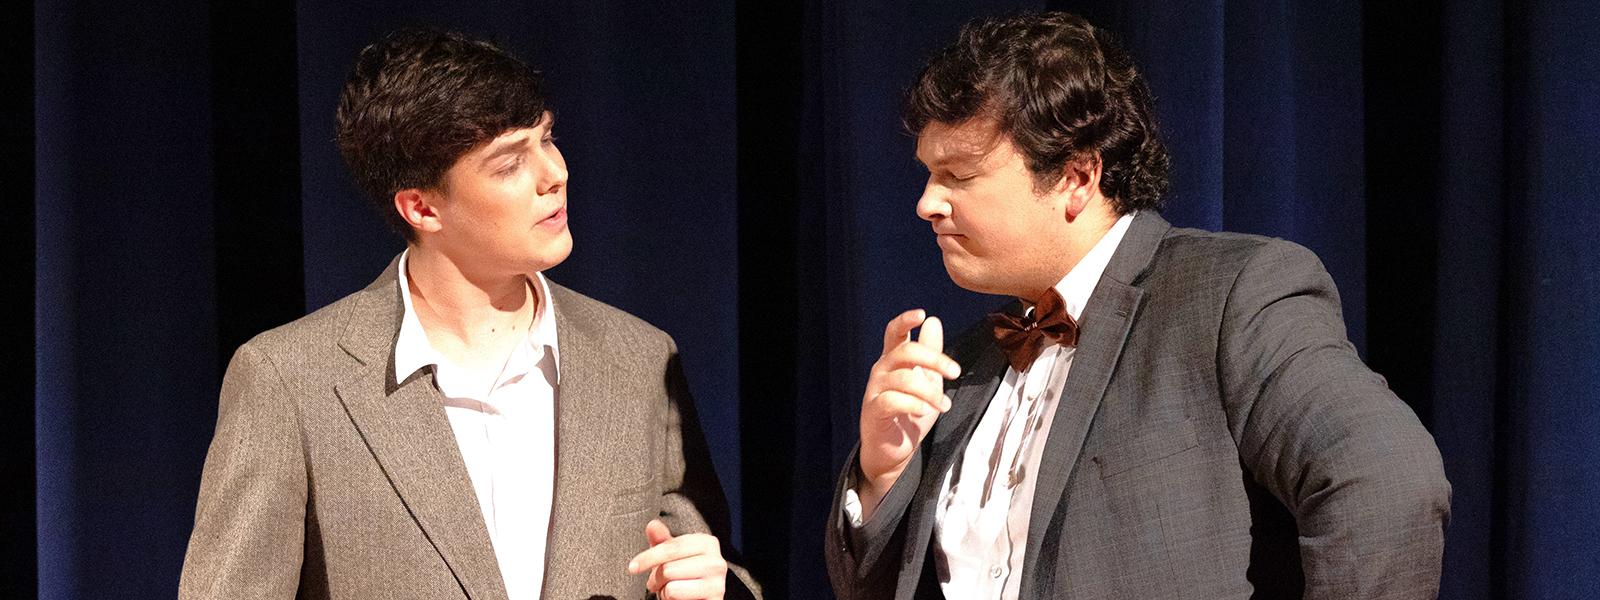 Elijah Hilliard as Bud Abbott and Drew Olson as Lou Costello. (Photo by Jared Hill)